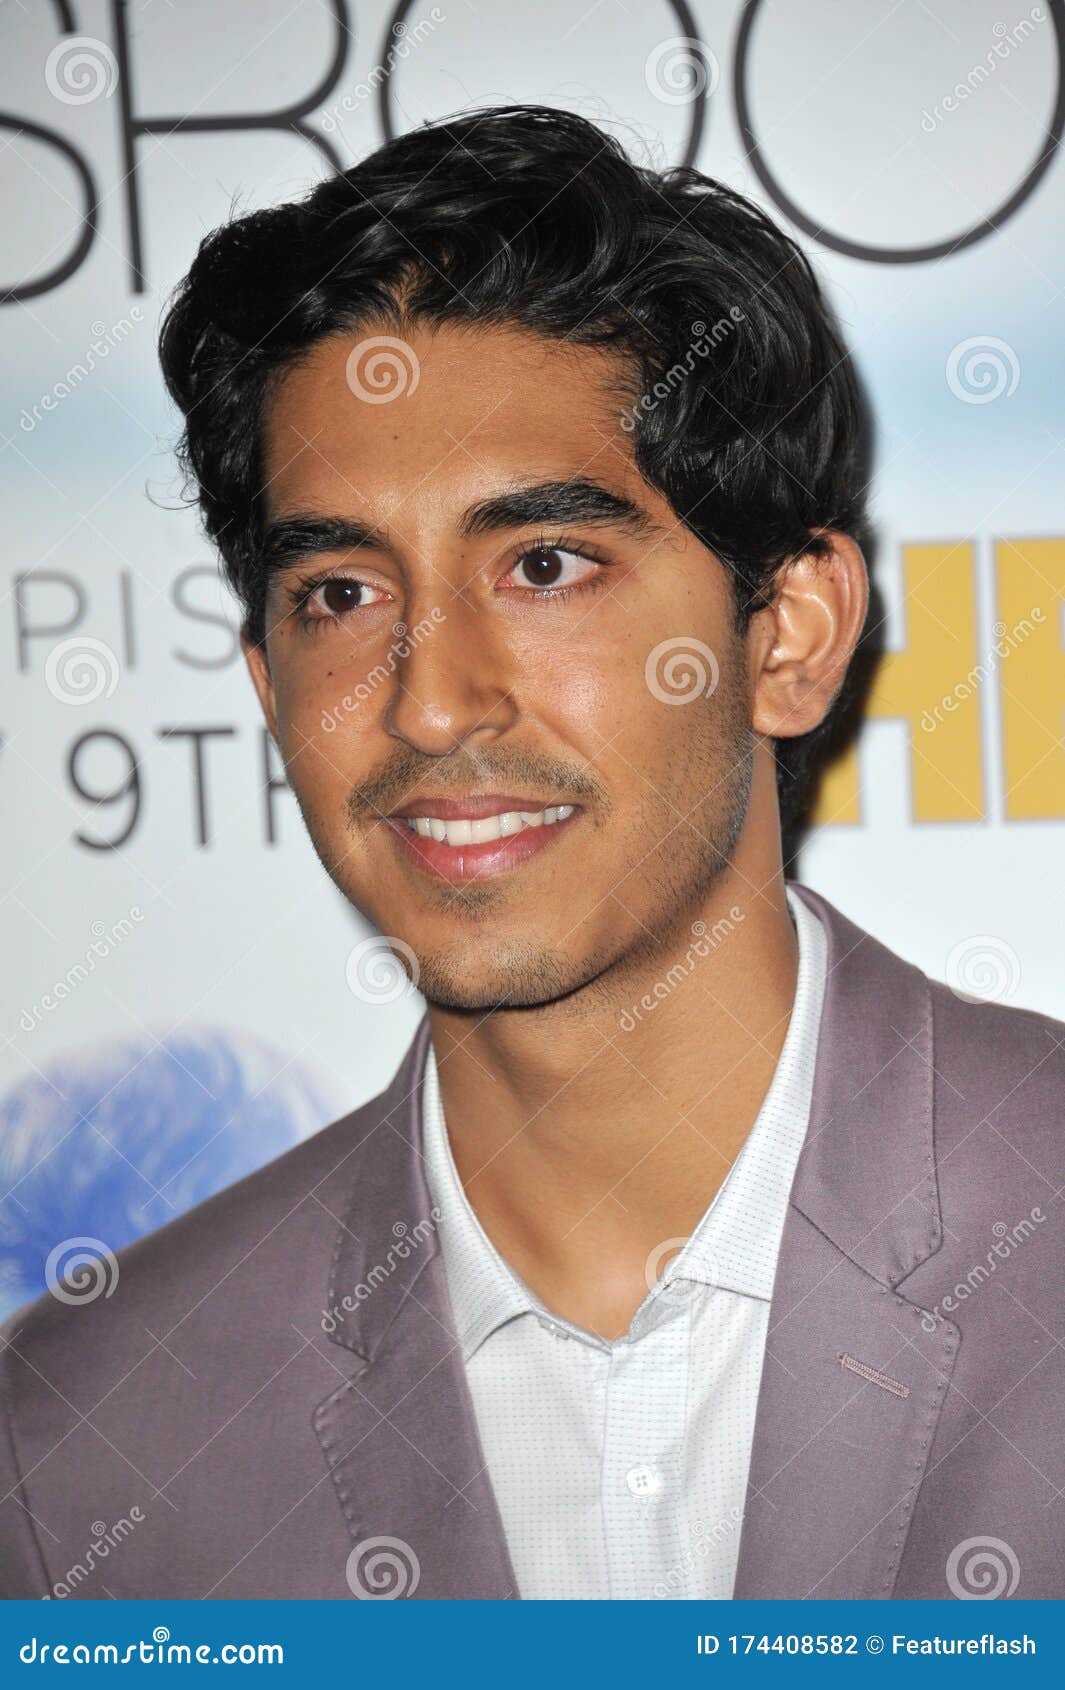 Dev Patel interview Lion star discusses Golden Globes speaking Australian  and feeling like a goofy celery stick  The Independent  The Independent